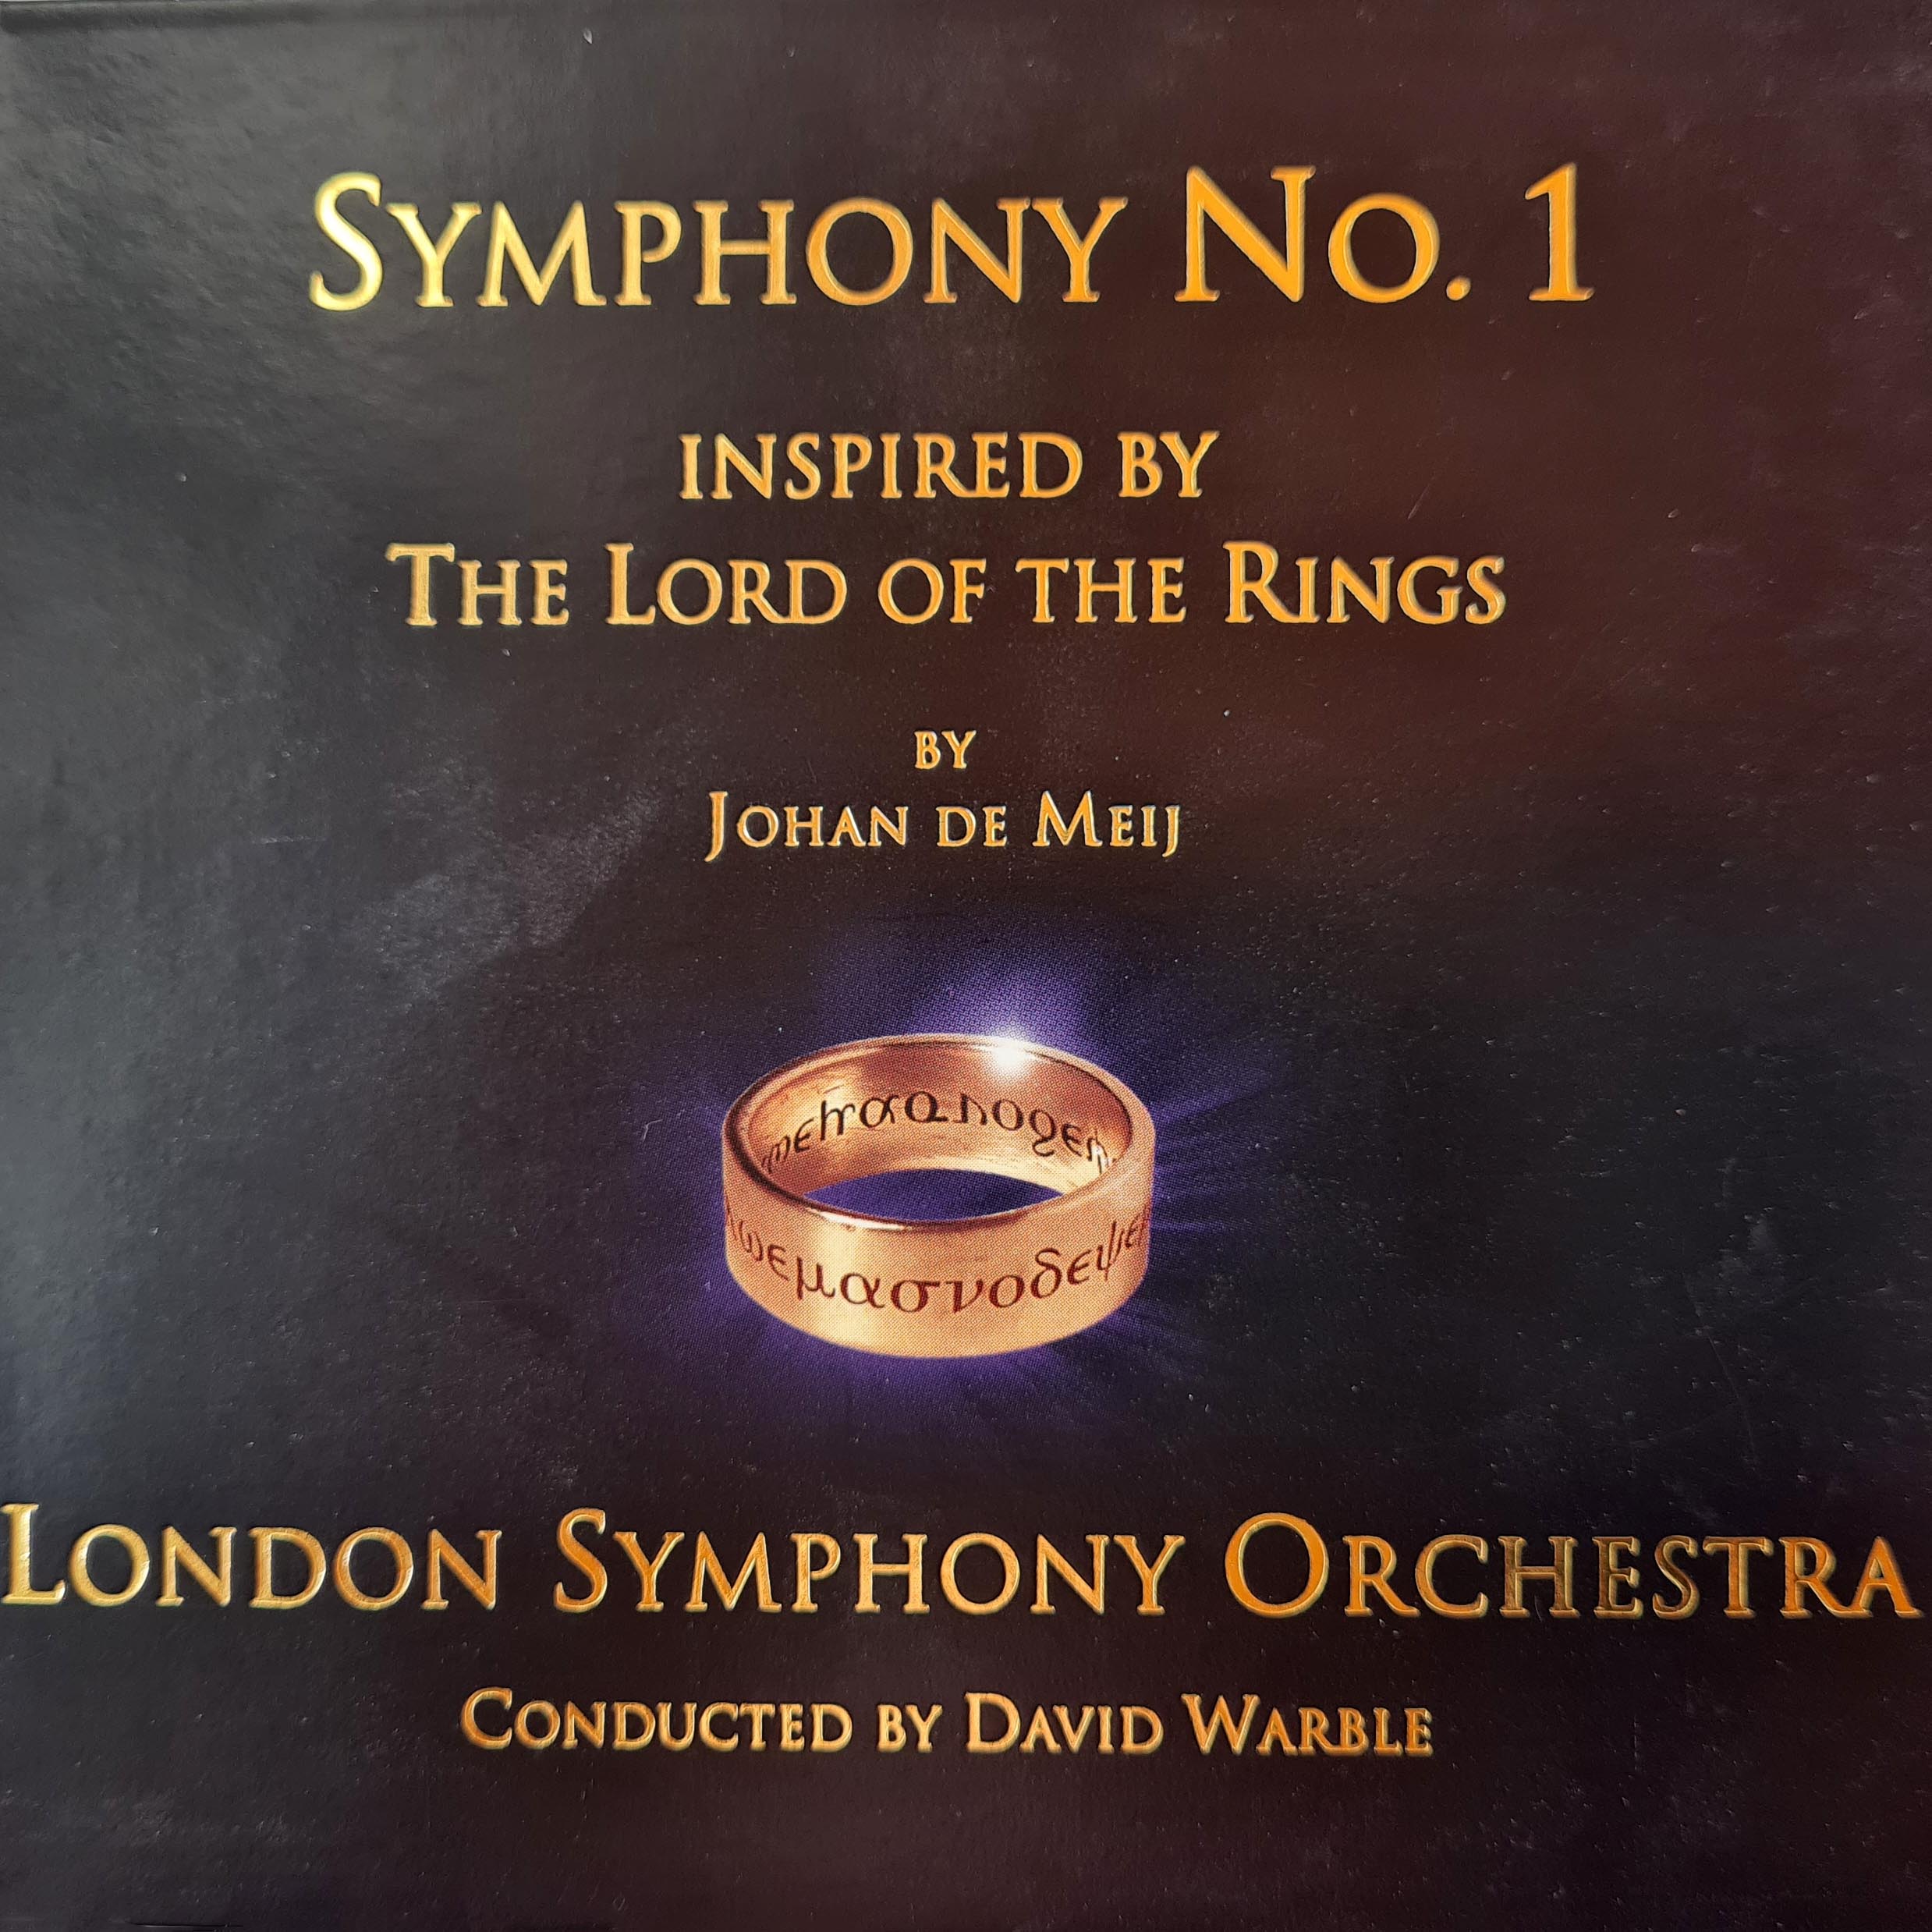 London Symphony Orchestra - Symphony No. 1  The Lord of the Rings (CD)